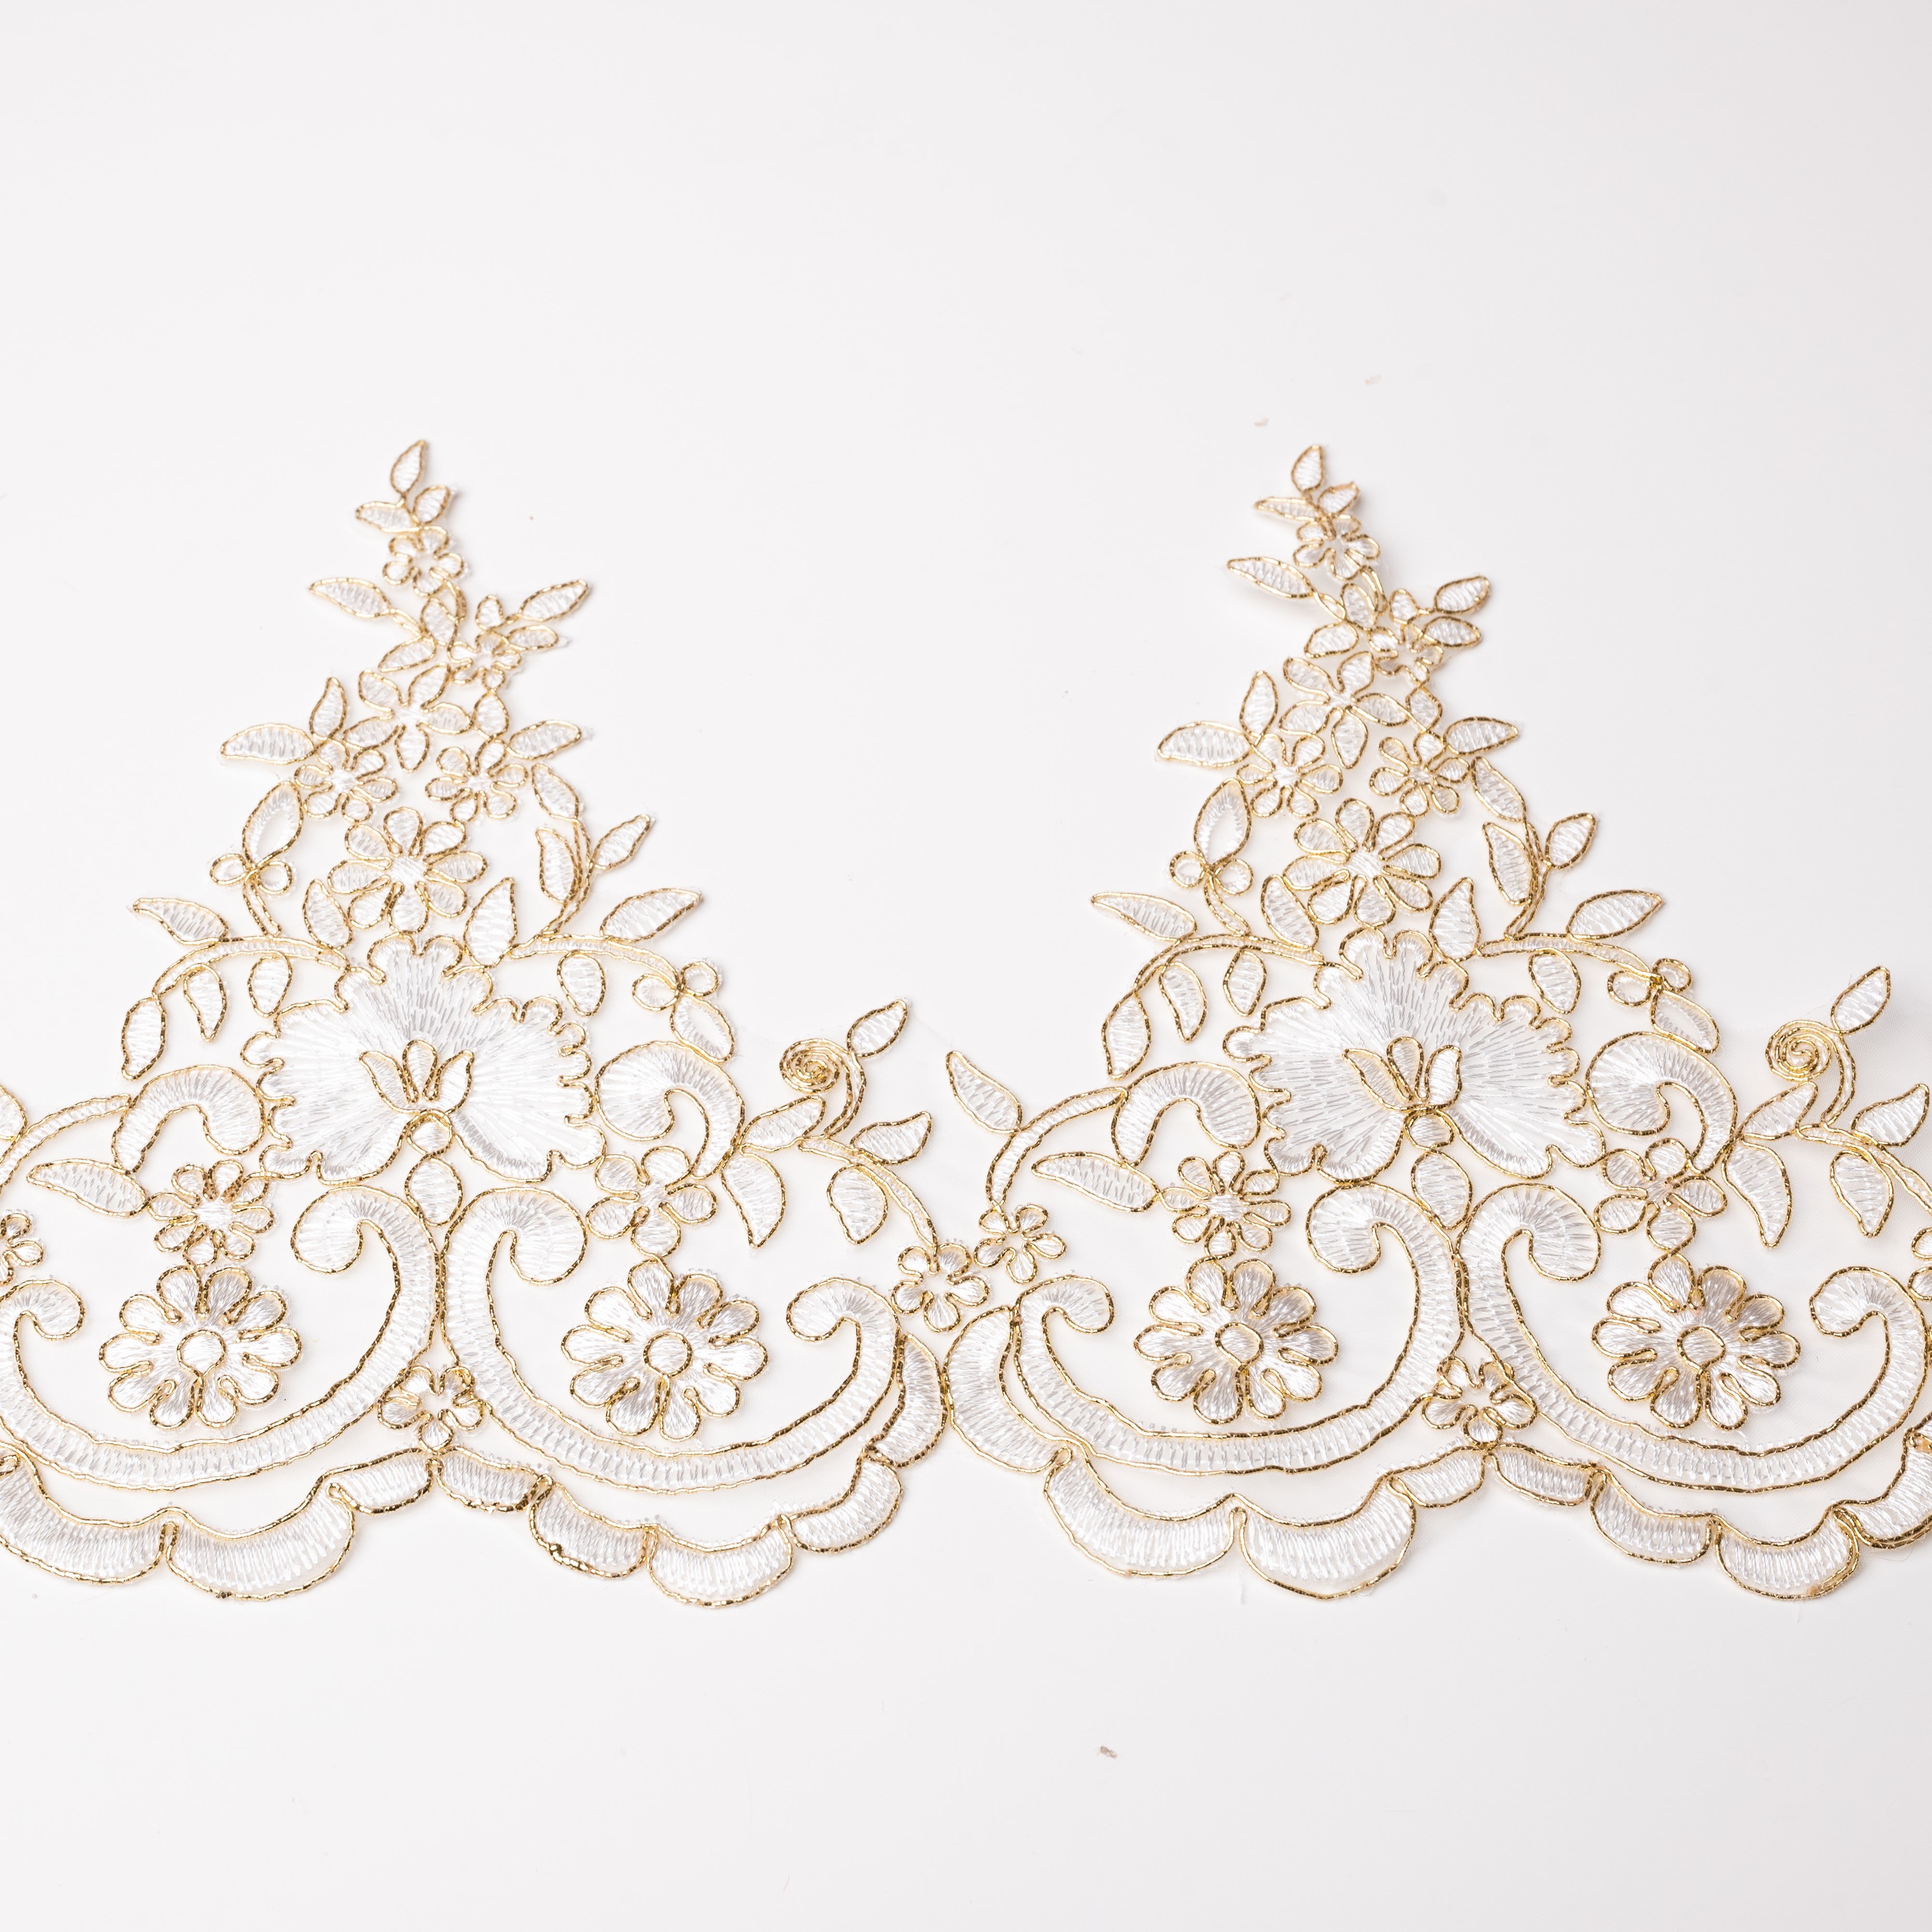 White embroidered lace border with a scalloped lower edge.  The floral pattern is edged with a fine gold metallic cord giving the lace an overall gold shimmer.  The lace is laying flat on a white background.